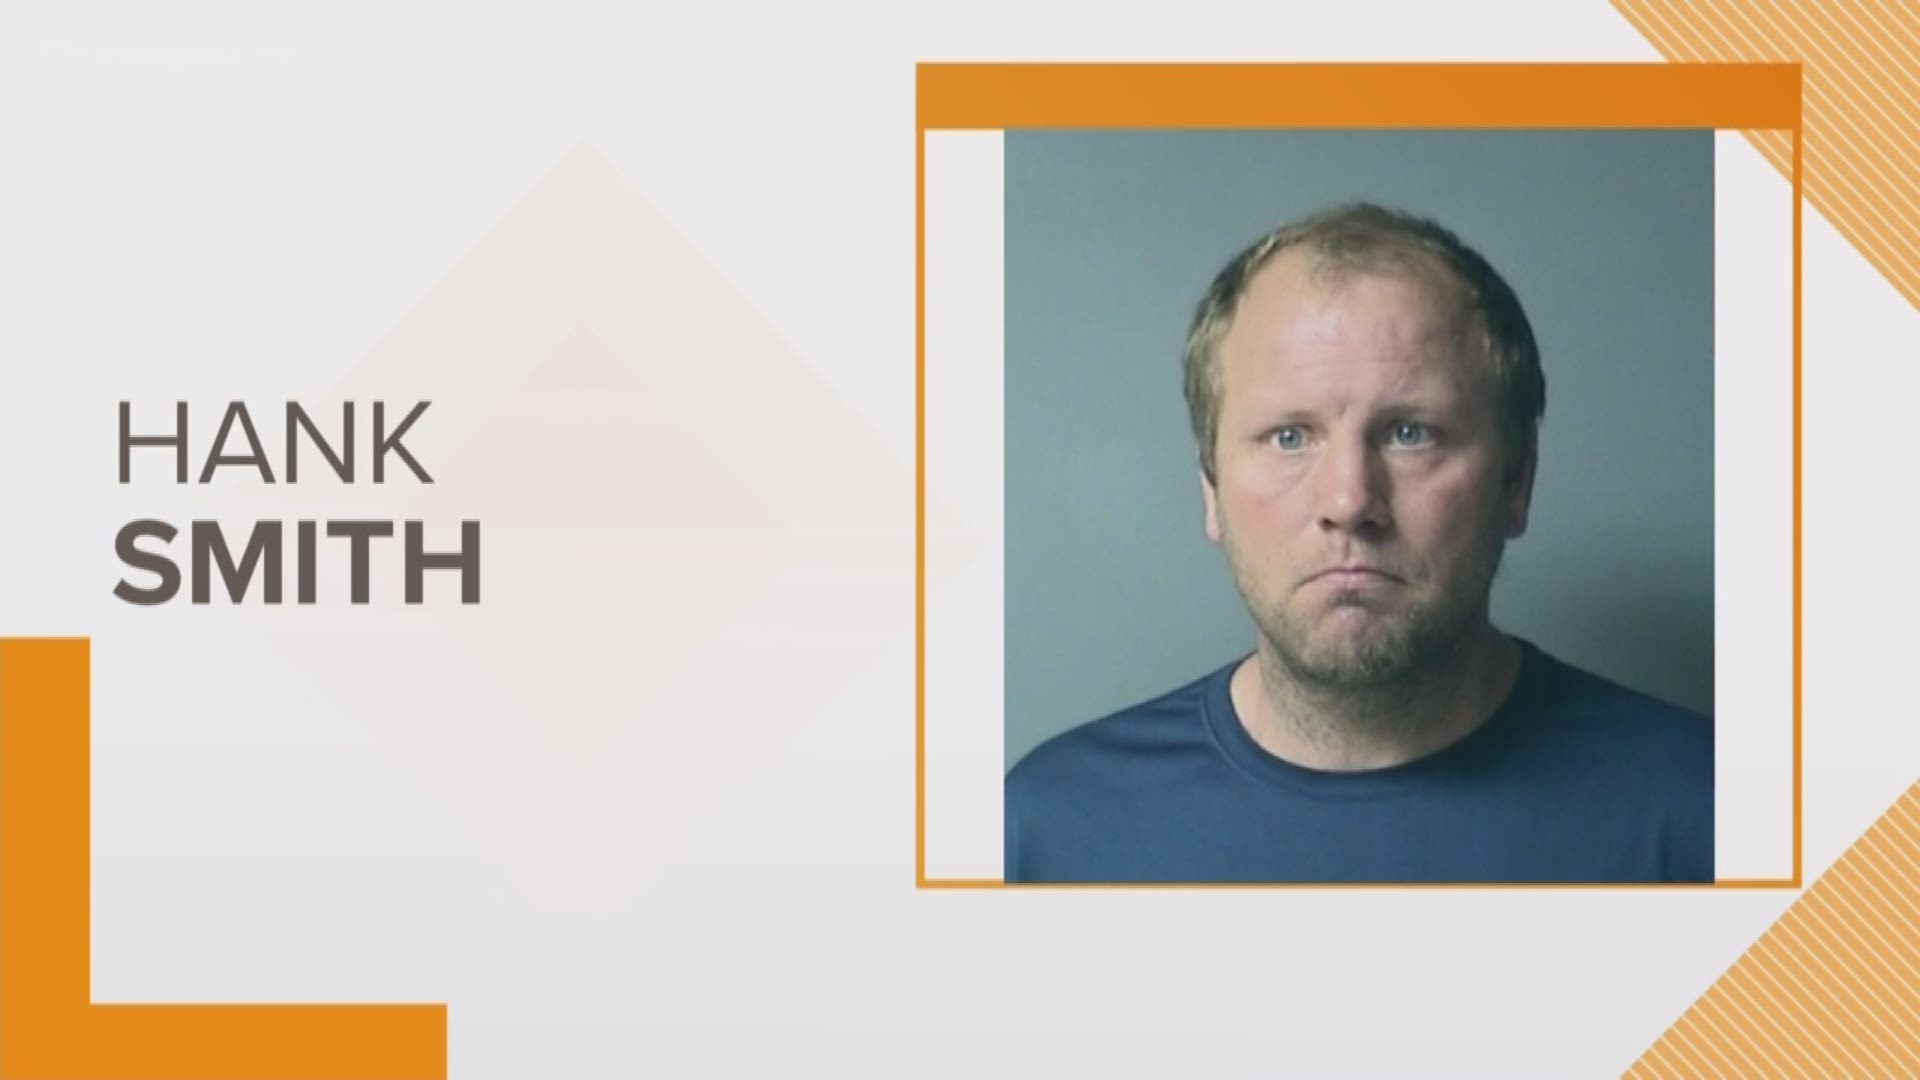 We learned why Hank Smith was charged with felony homicide in the death of his son, 4-year-old Larkin Carr.